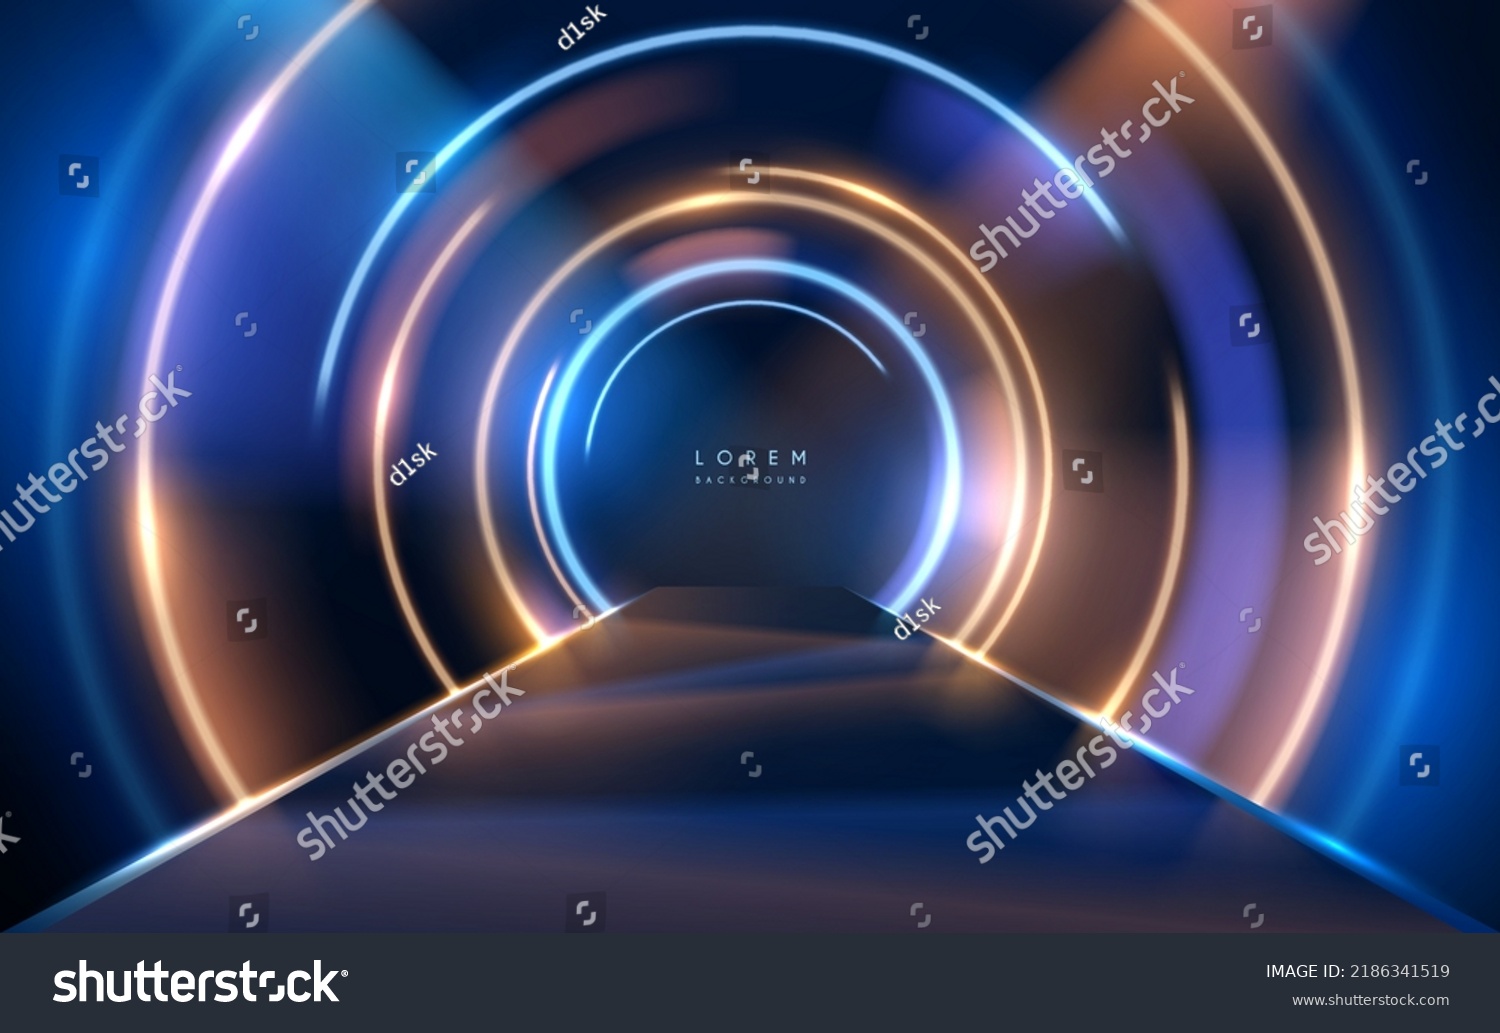 stock-vector-abstract-blue-and-gold-circle-light-effect-background-2186341519